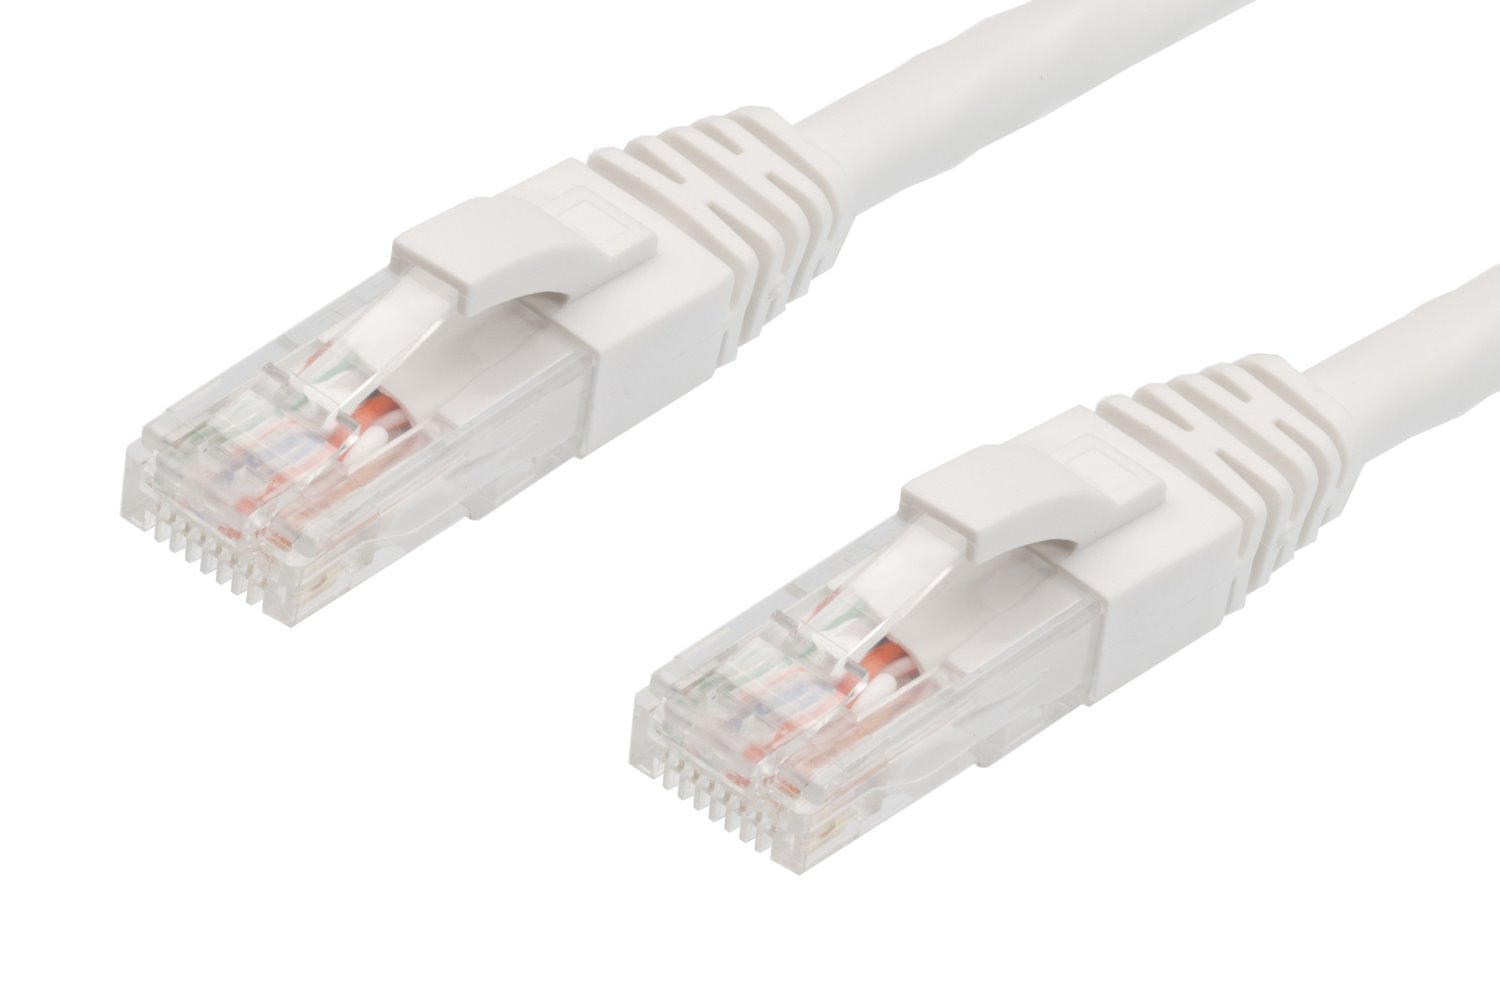 4Cabling 0.5M RJ45 Cat6 Ethernet Cable. White